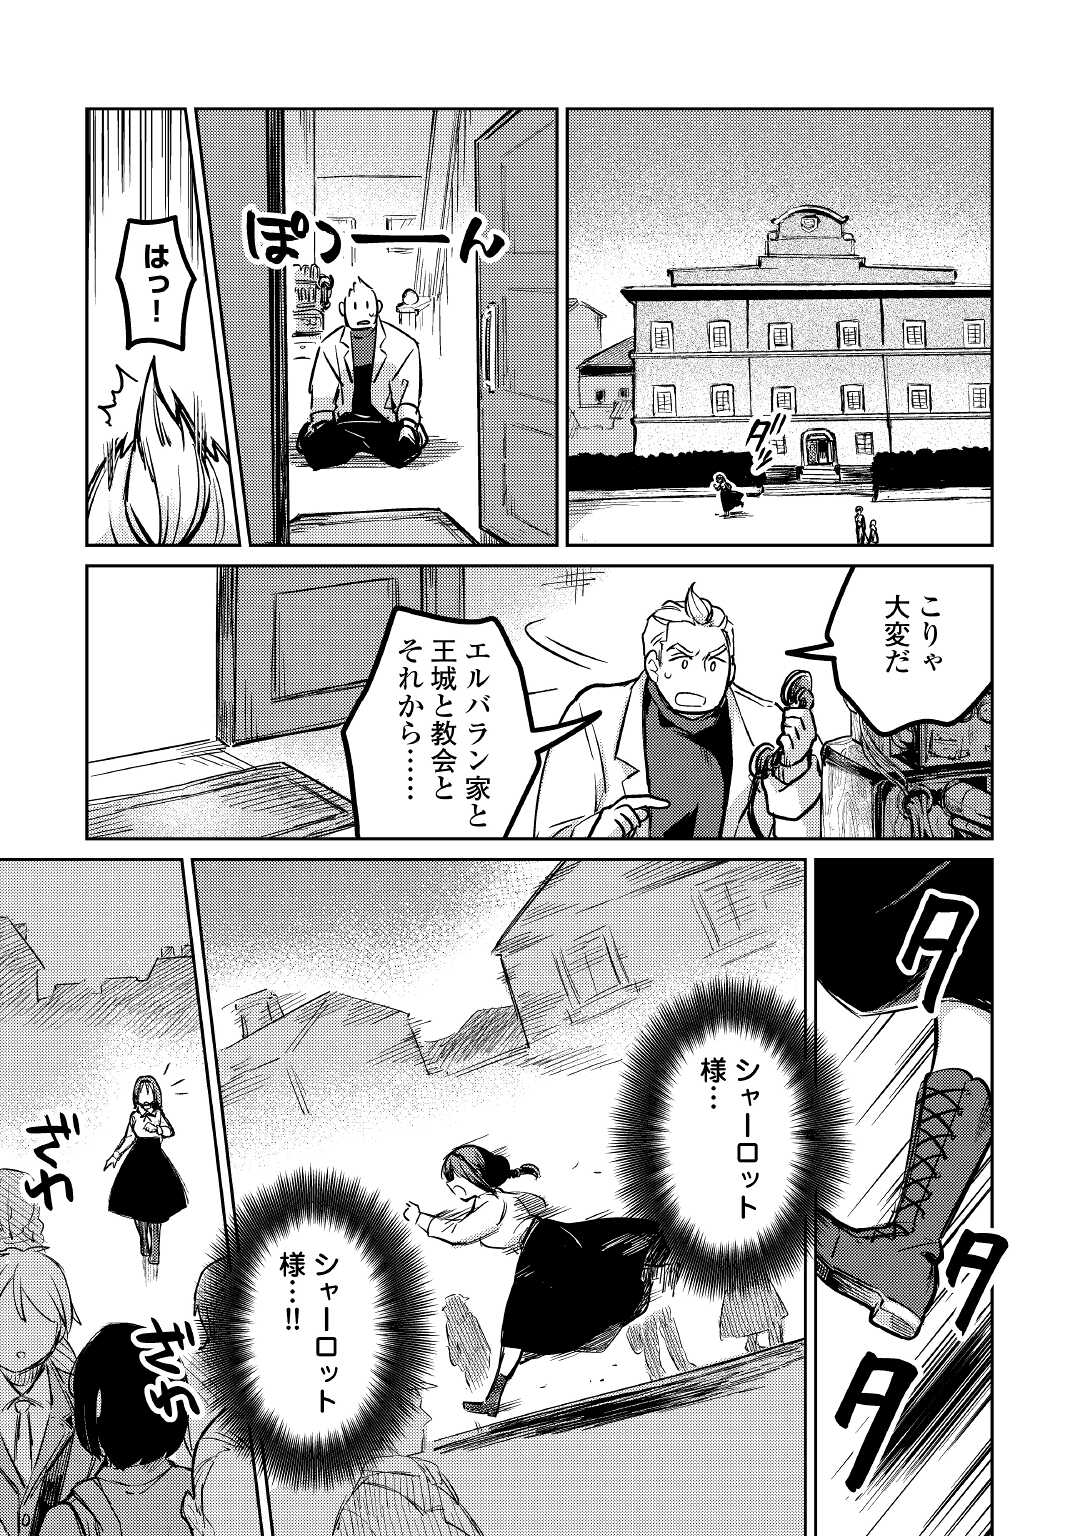 The Former Structural Researcher’s Story of Otherworldly Adventure 第41話 - Page 27